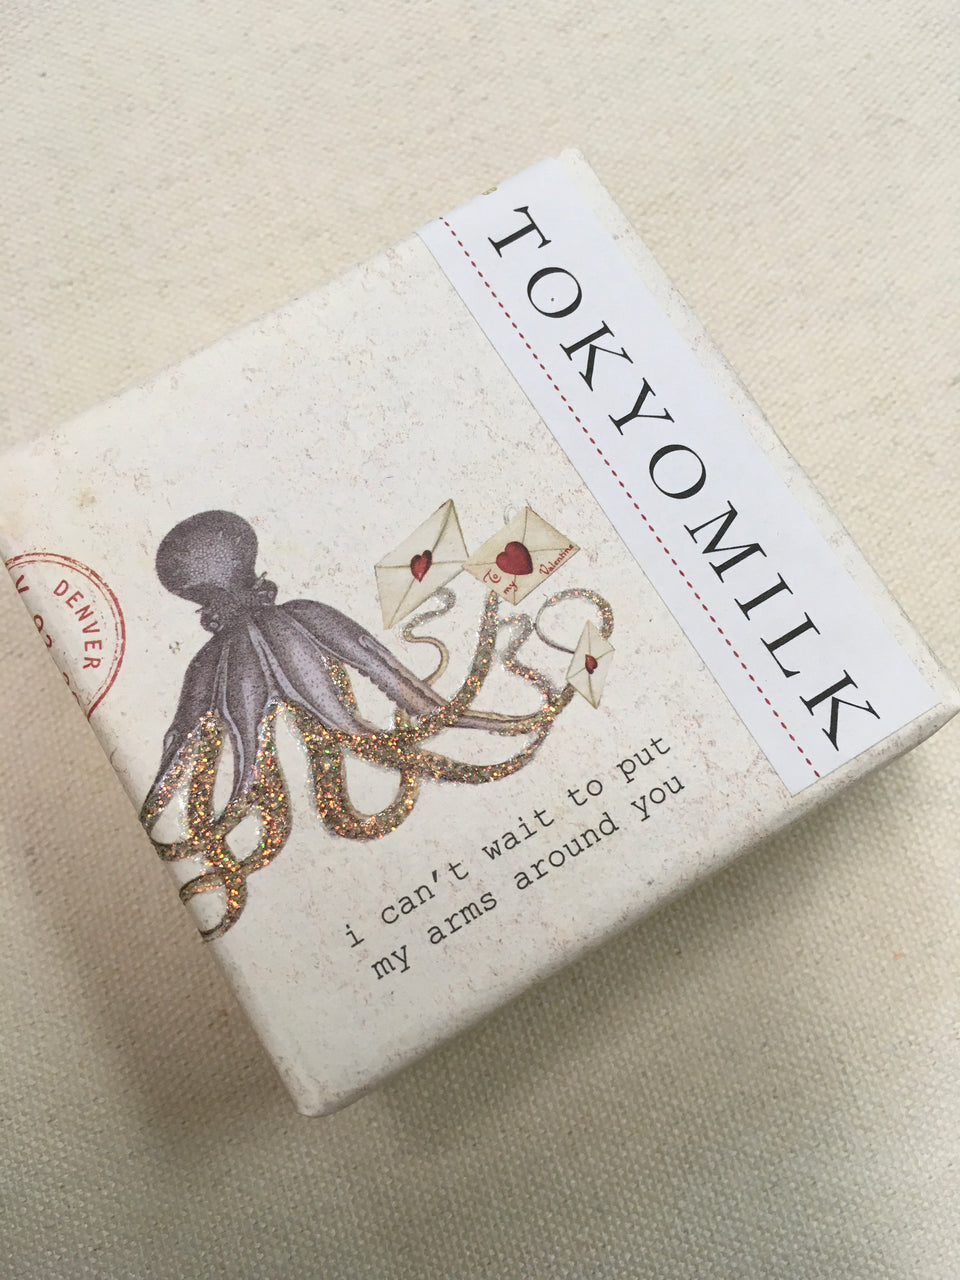 octopus soap with i cant wait to put my arms around you